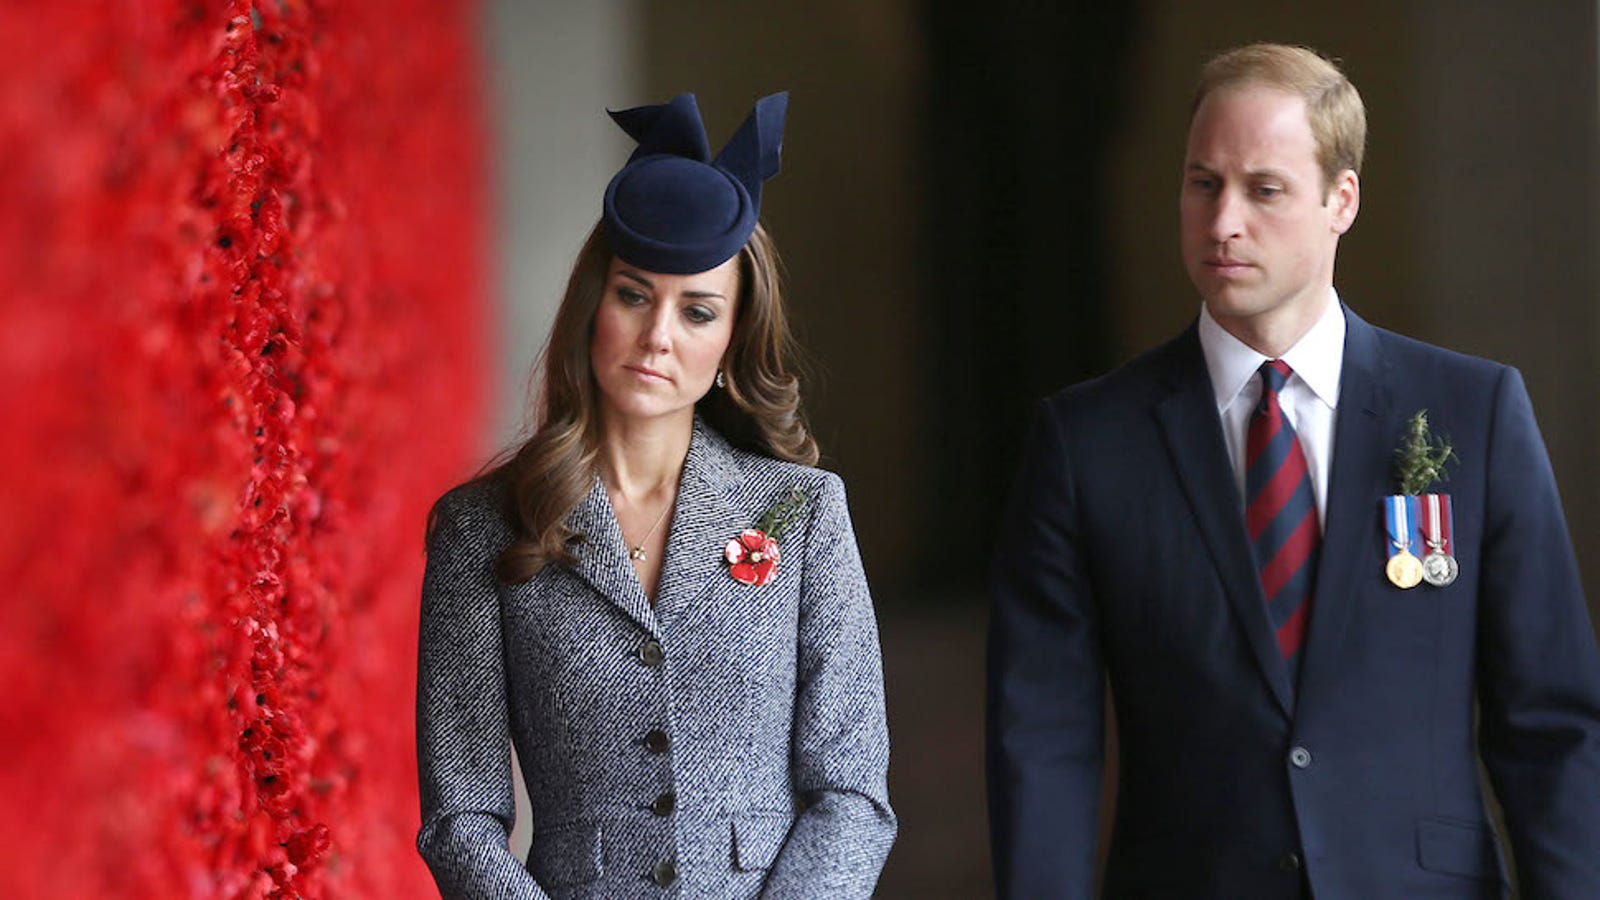 The Royal Family Doesnt Fuck Around With Its Dress Code For Journalists